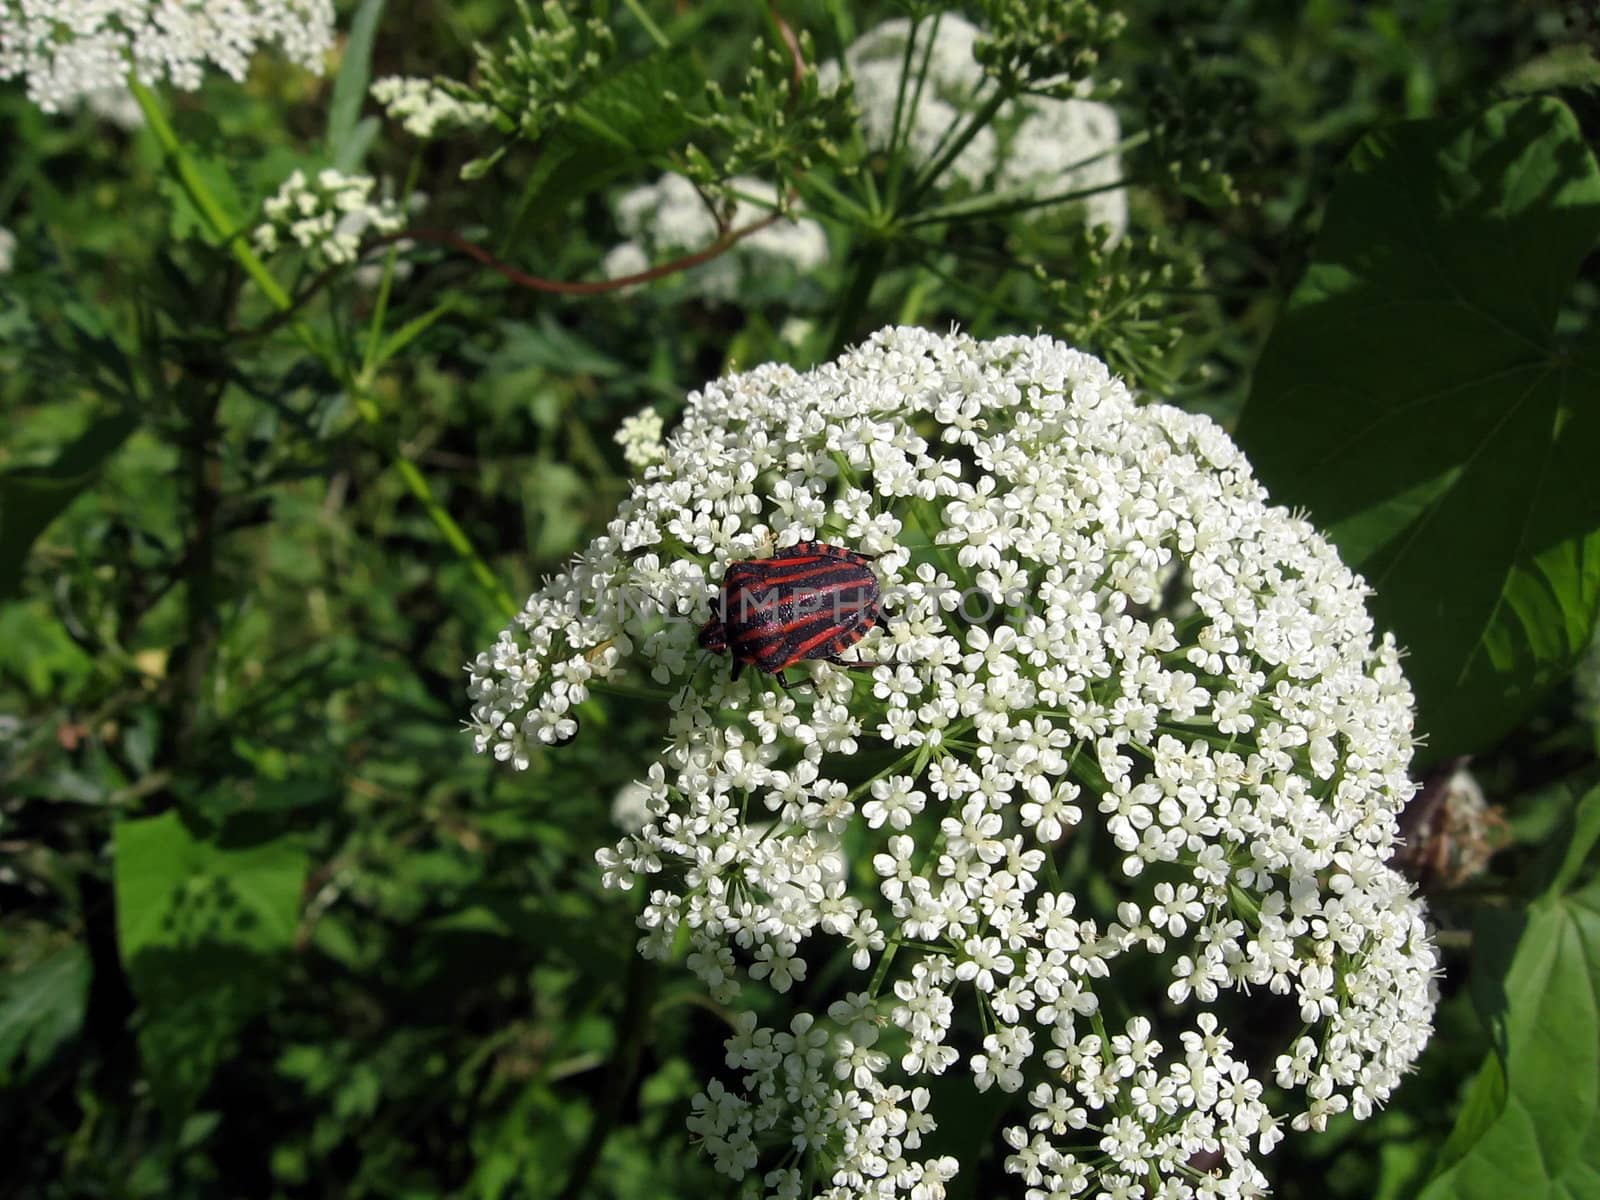 Bug on white flowers by tomatto